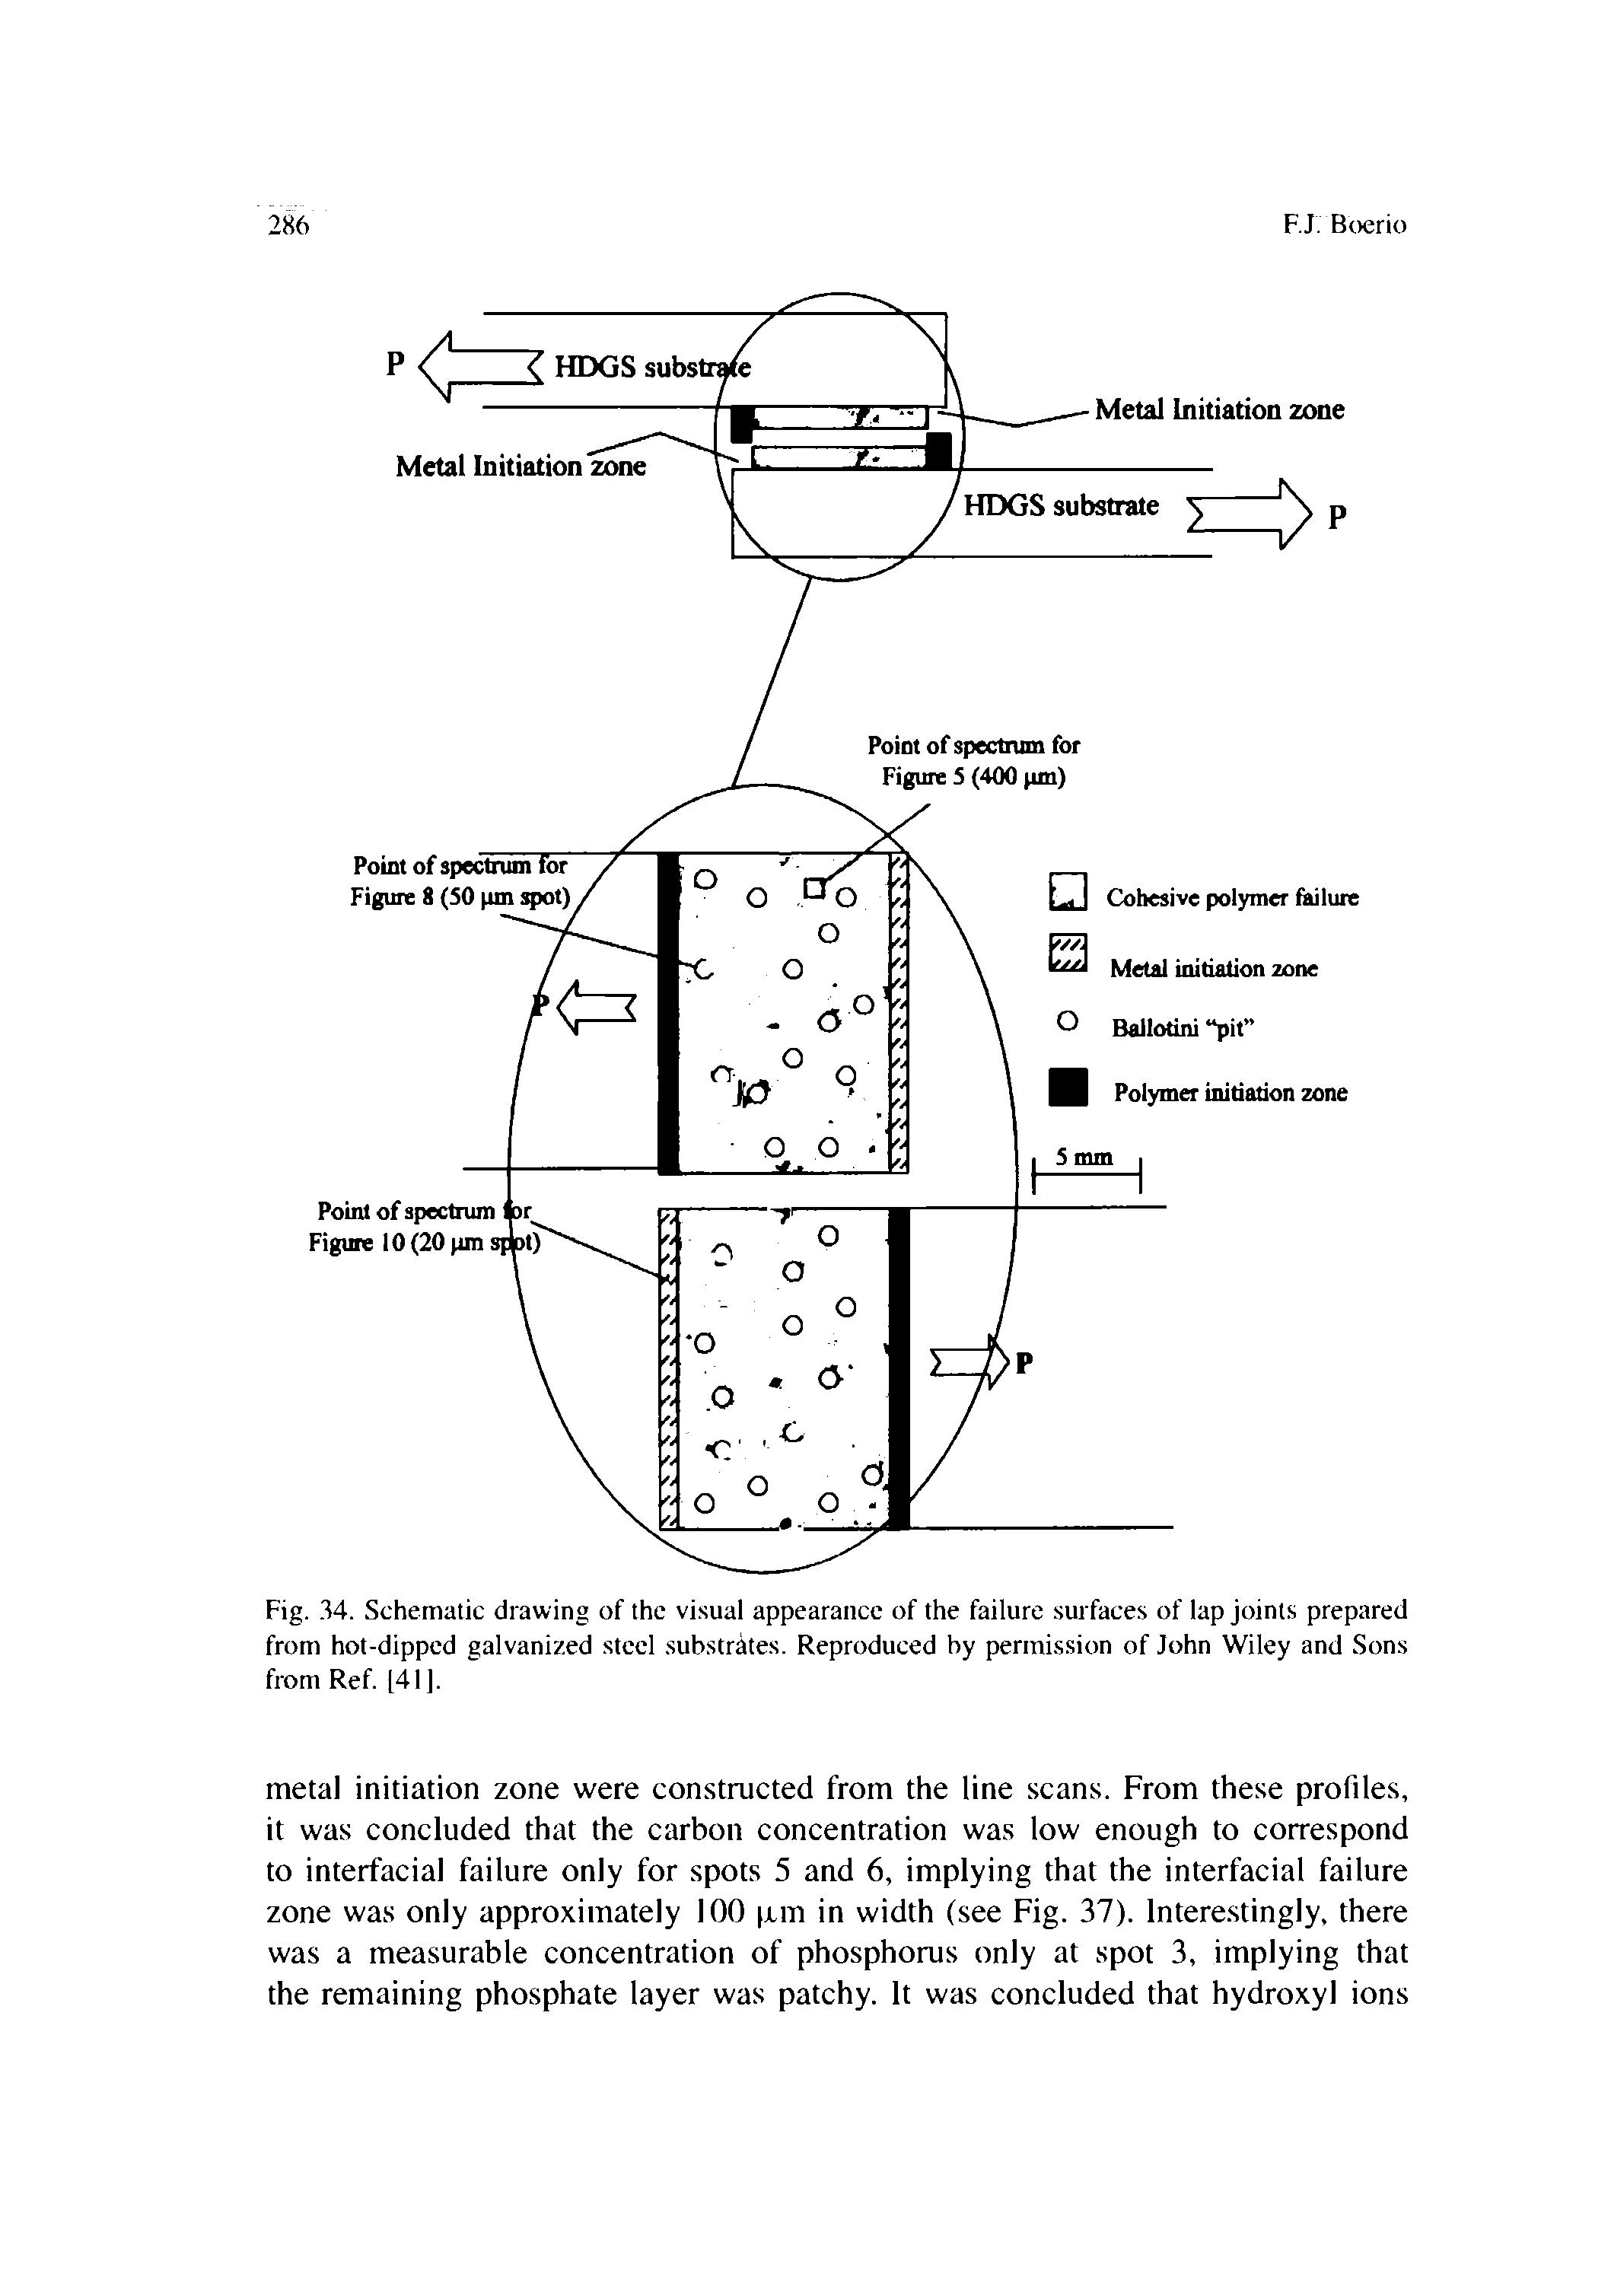 Fig.. 24. Schematic drawing of the visual appearance of the failure surfaces of lap joints prepared from hot-dipped galvanized steel substrates. Reproduced by permission of John Wiley and Sons from Ref. [41].